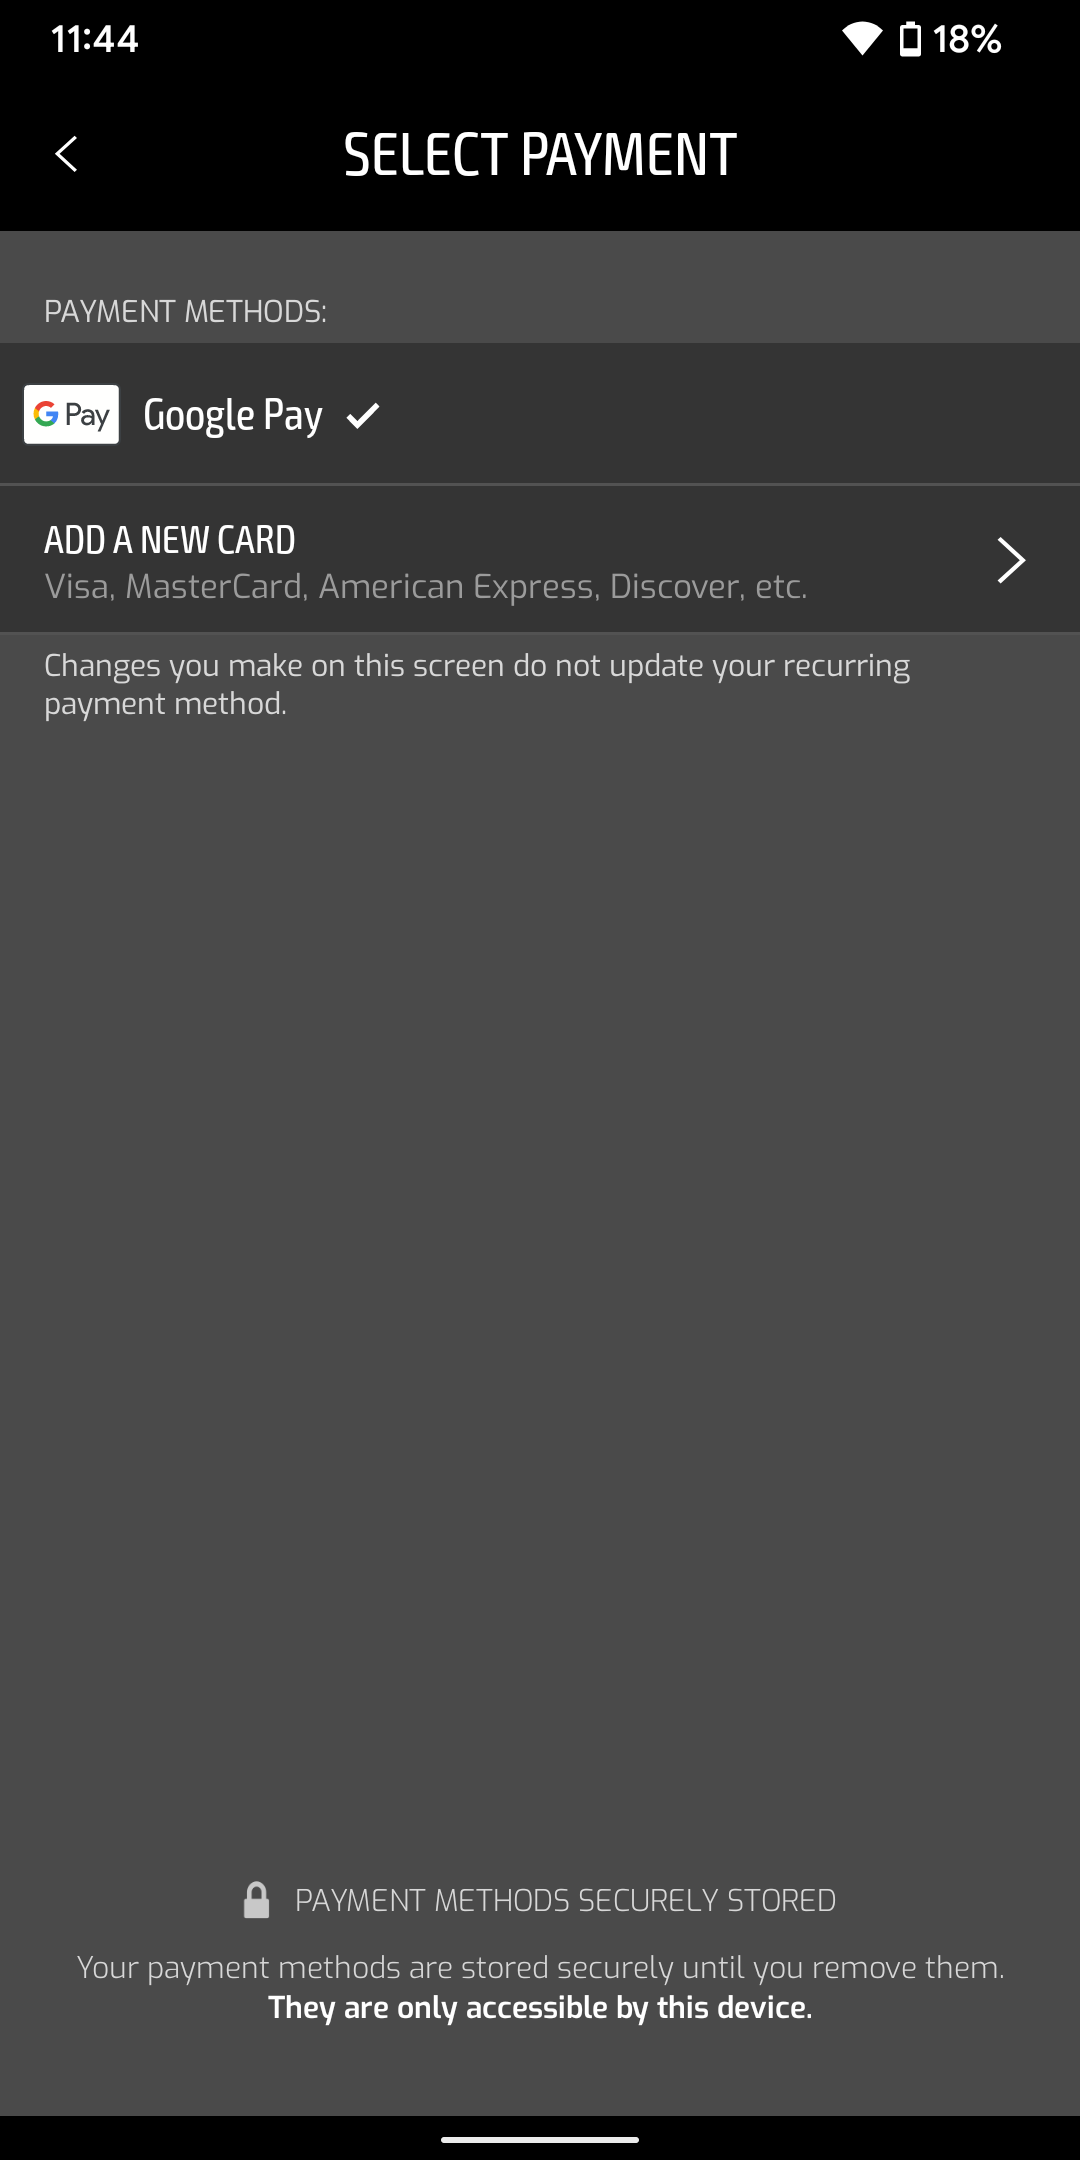 Regal accepts Google Pay in its Android app.